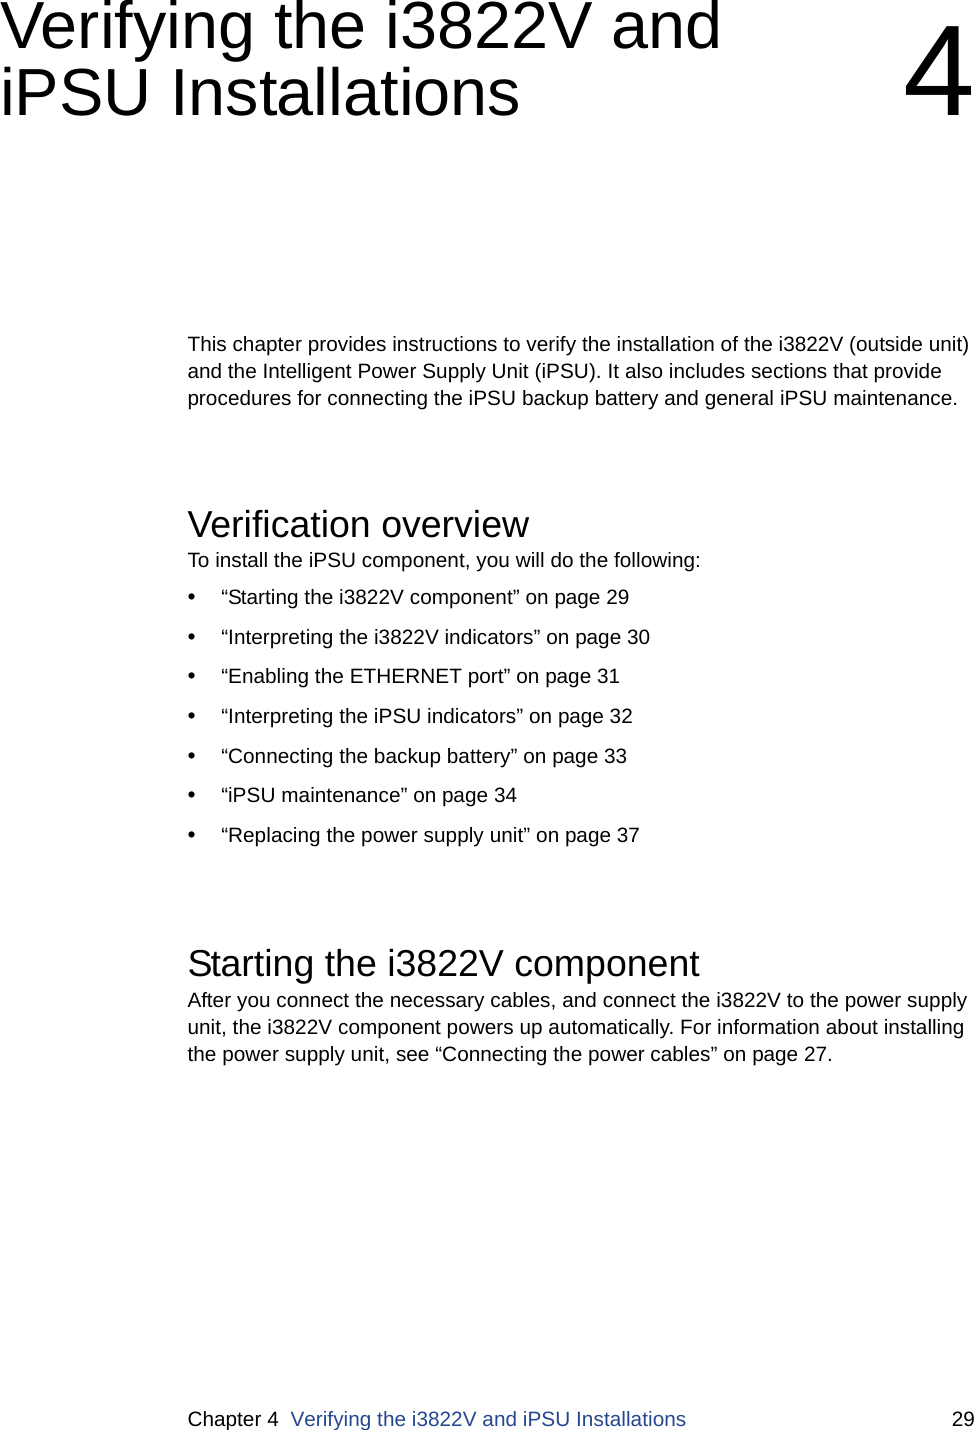 Chapter 4  Verifying the i3822V and iPSU Installations 29Verifying the i3822V and iPSU Installations 4This chapter provides instructions to verify the installation of the i3822V (outside unit) and the Intelligent Power Supply Unit (iPSU). It also includes sections that provide procedures for connecting the iPSU backup battery and general iPSU maintenance.Verification overviewTo install the iPSU component, you will do the following: •“Starting the i3822V component” on page 29•“Interpreting the i3822V indicators” on page 30•“Enabling the ETHERNET port” on page 31•“Interpreting the iPSU indicators” on page 32•“Connecting the backup battery” on page 33•“iPSU maintenance” on page 34•“Replacing the power supply unit” on page 37Starting the i3822V componentAfter you connect the necessary cables, and connect the i3822V to the power supply unit, the i3822V component powers up automatically. For information about installing the power supply unit, see “Connecting the power cables” on page 27.